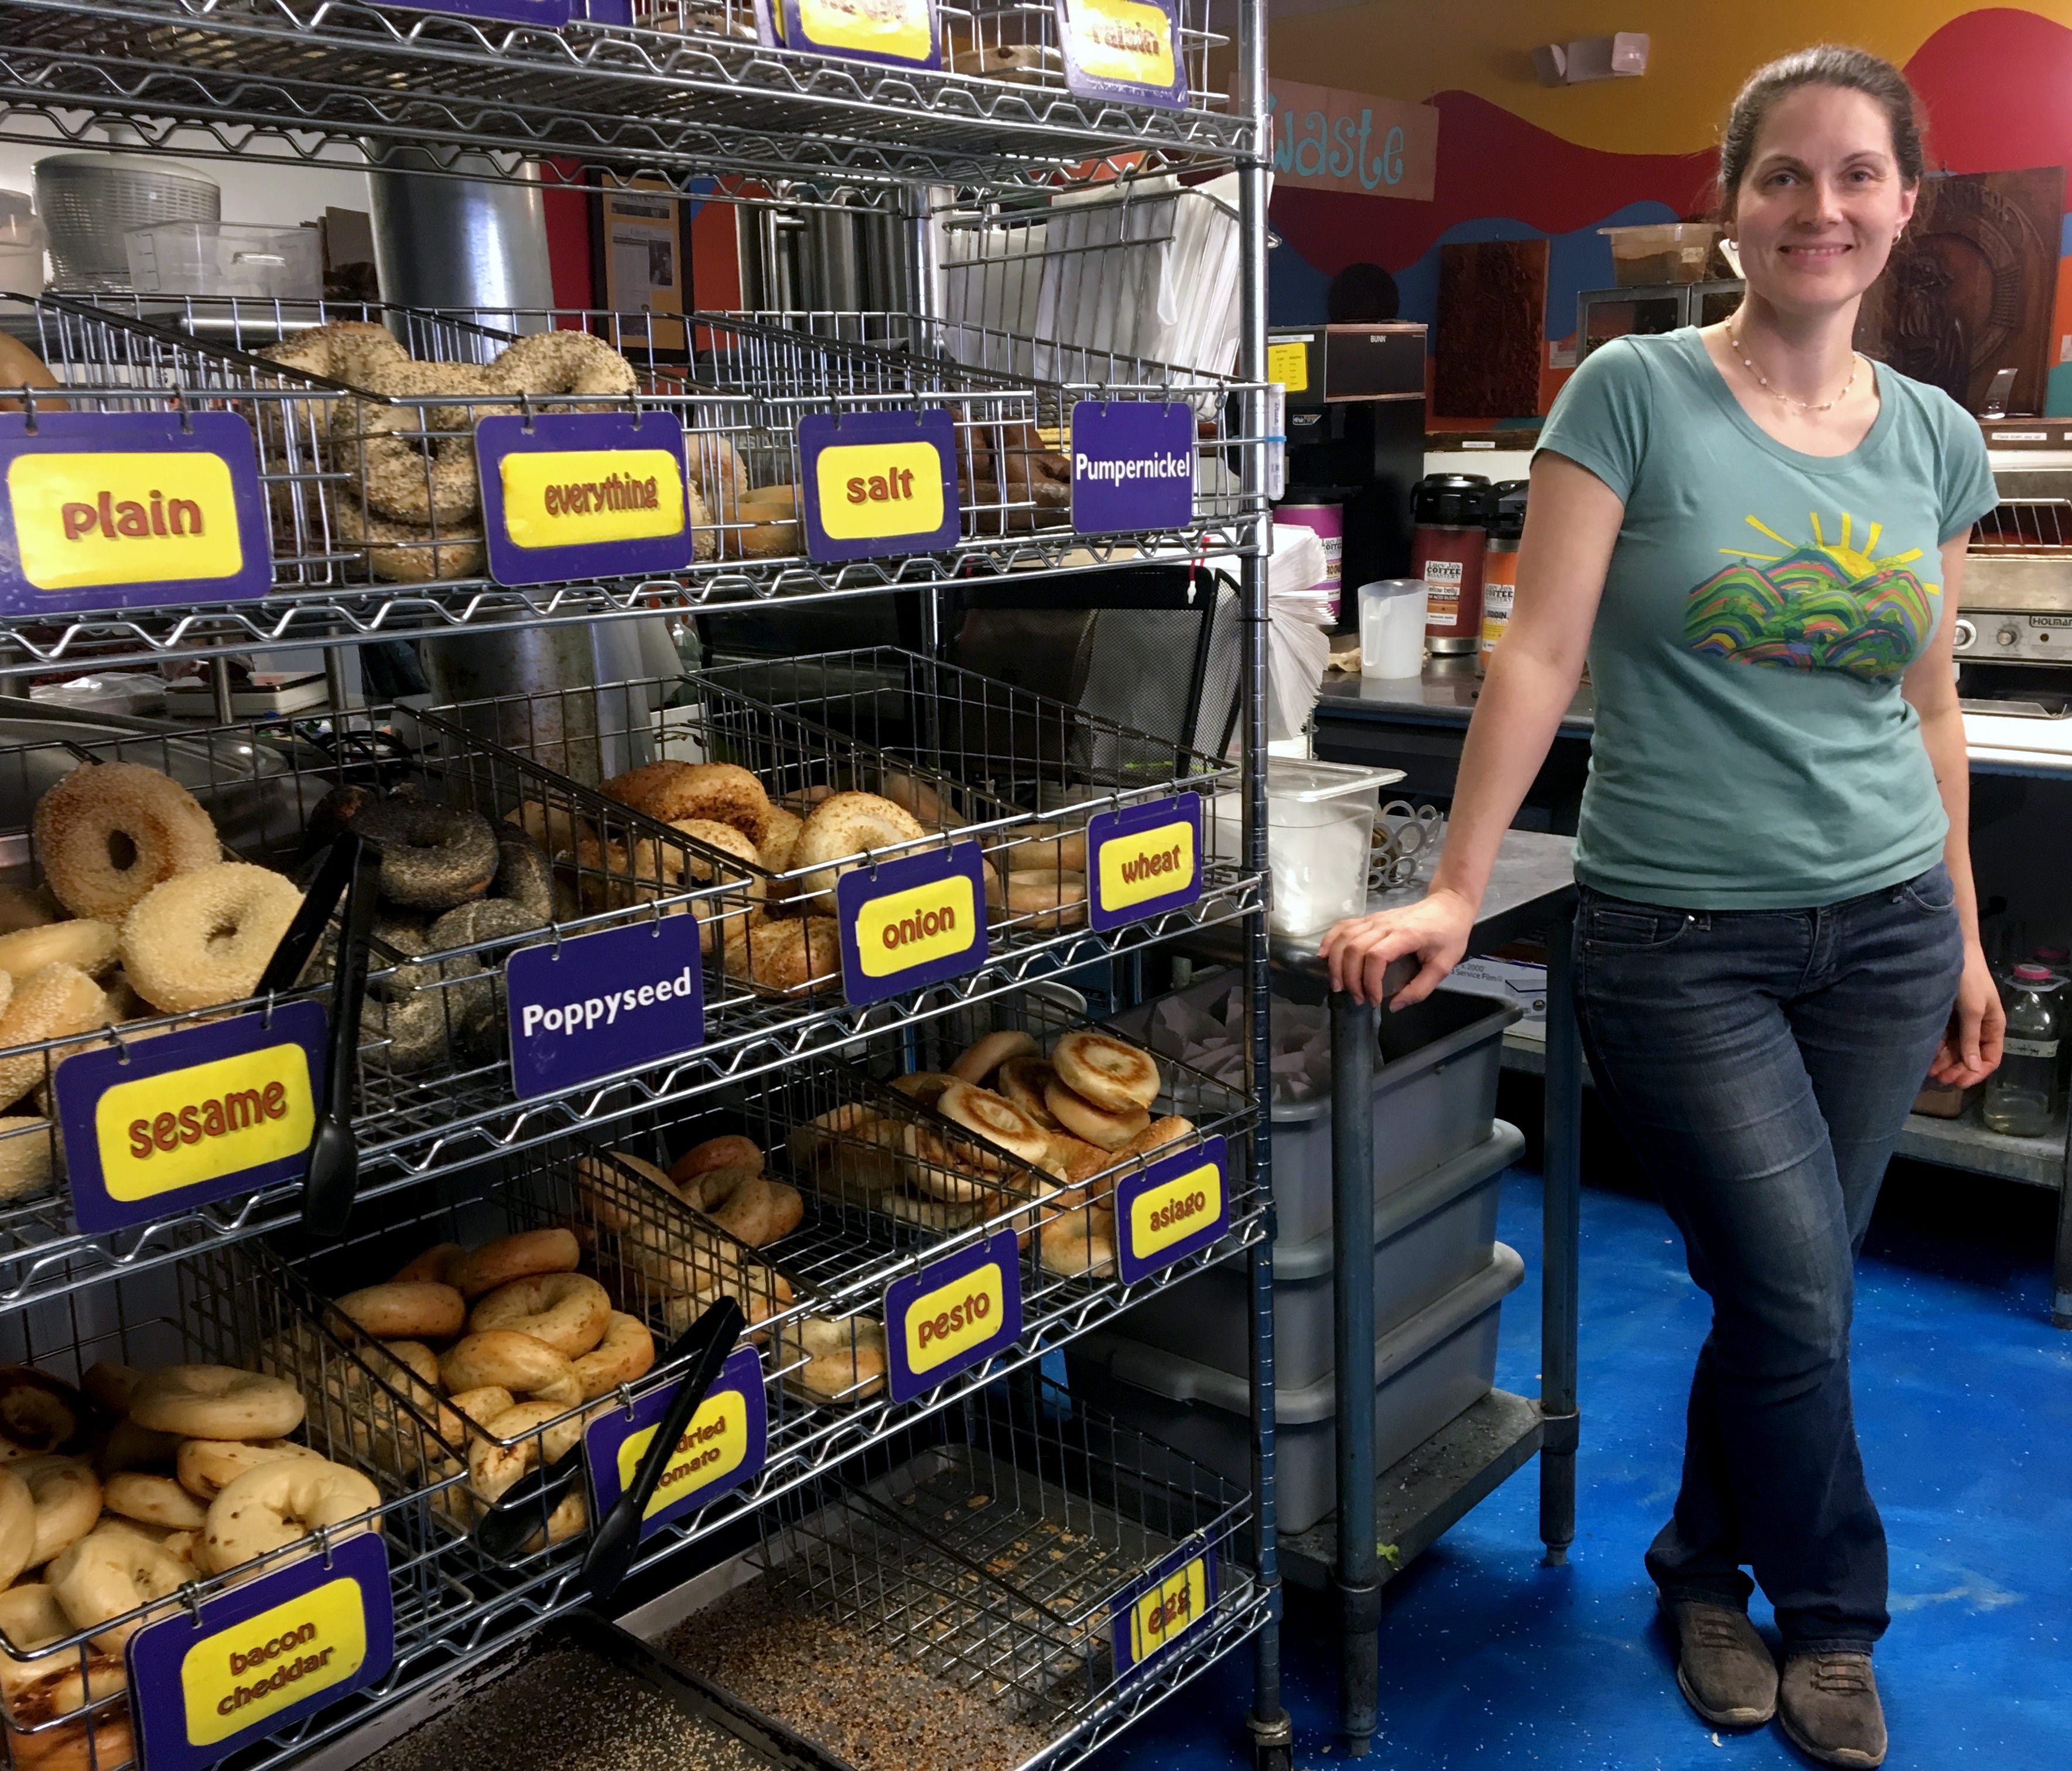 Laura Kerrone, owner of the Psychedelicatessen bagel bistro, poses beside a bagel rack at her store in Troy, N.Y. Kerrone said she looks forward to providing a payroll deduction retirement savings plan to her employees if a state-facilitated program 